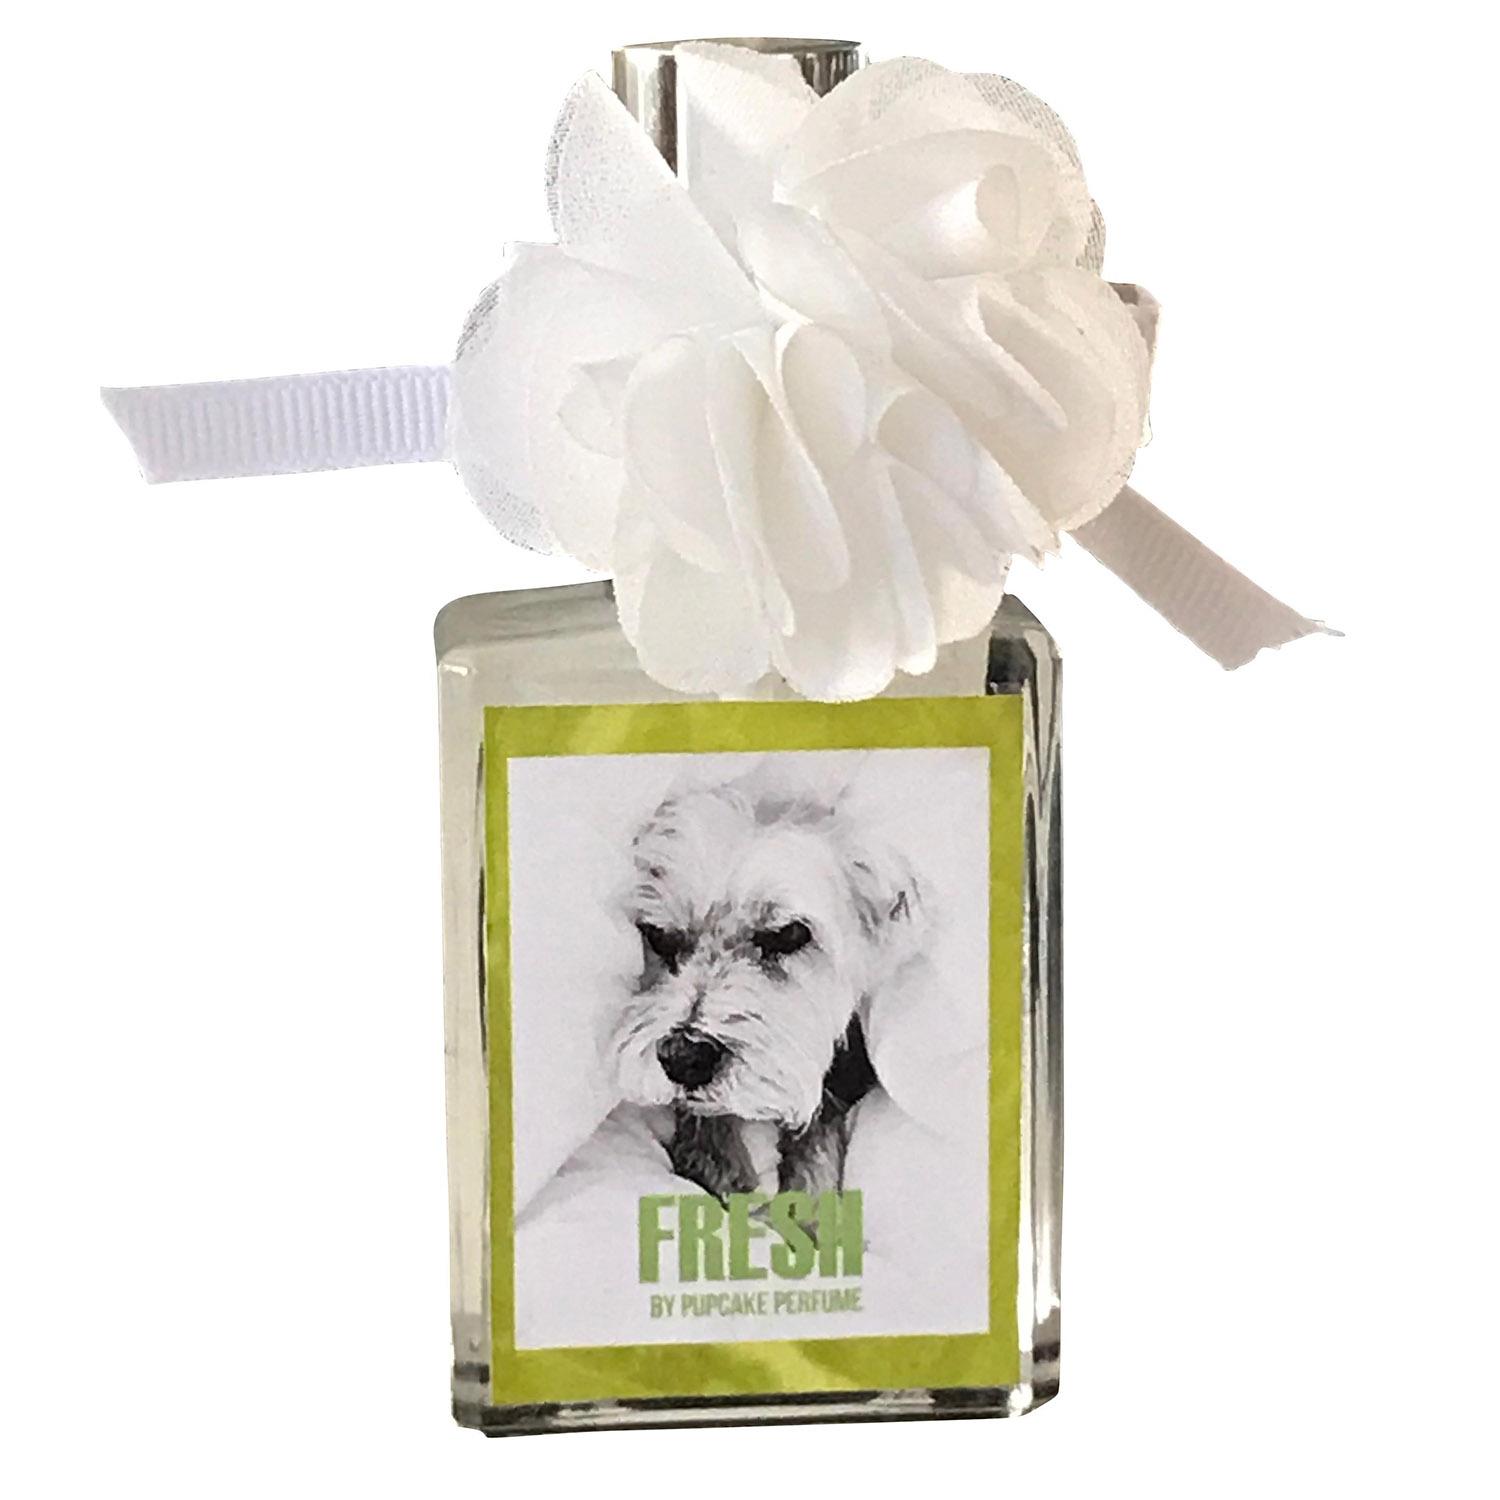 The Dog Squad Pupcake Perfume for Dogs - Fresh